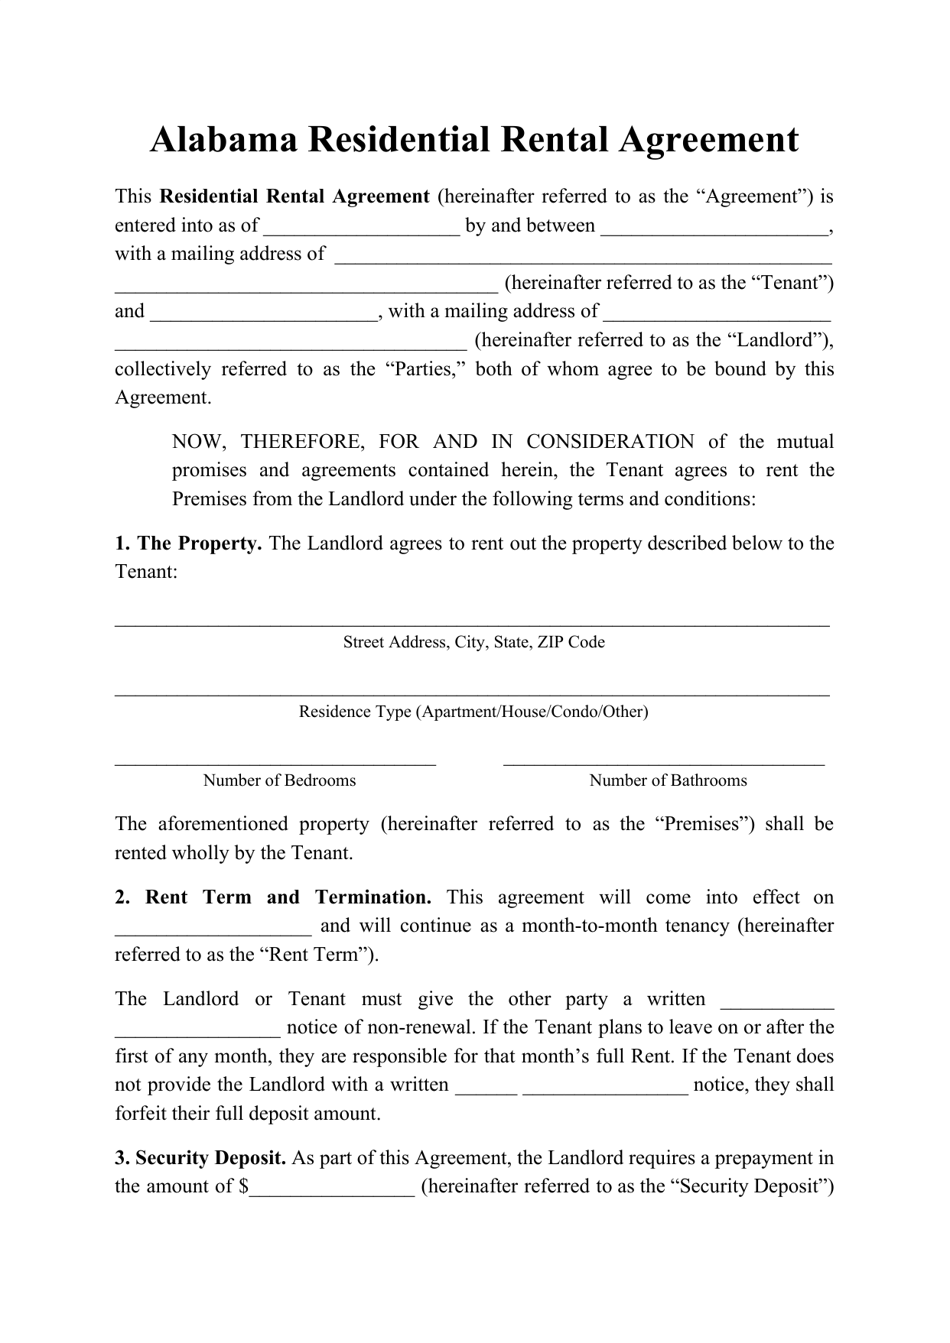 Residential Rental Agreement Template - Alabama, Page 1